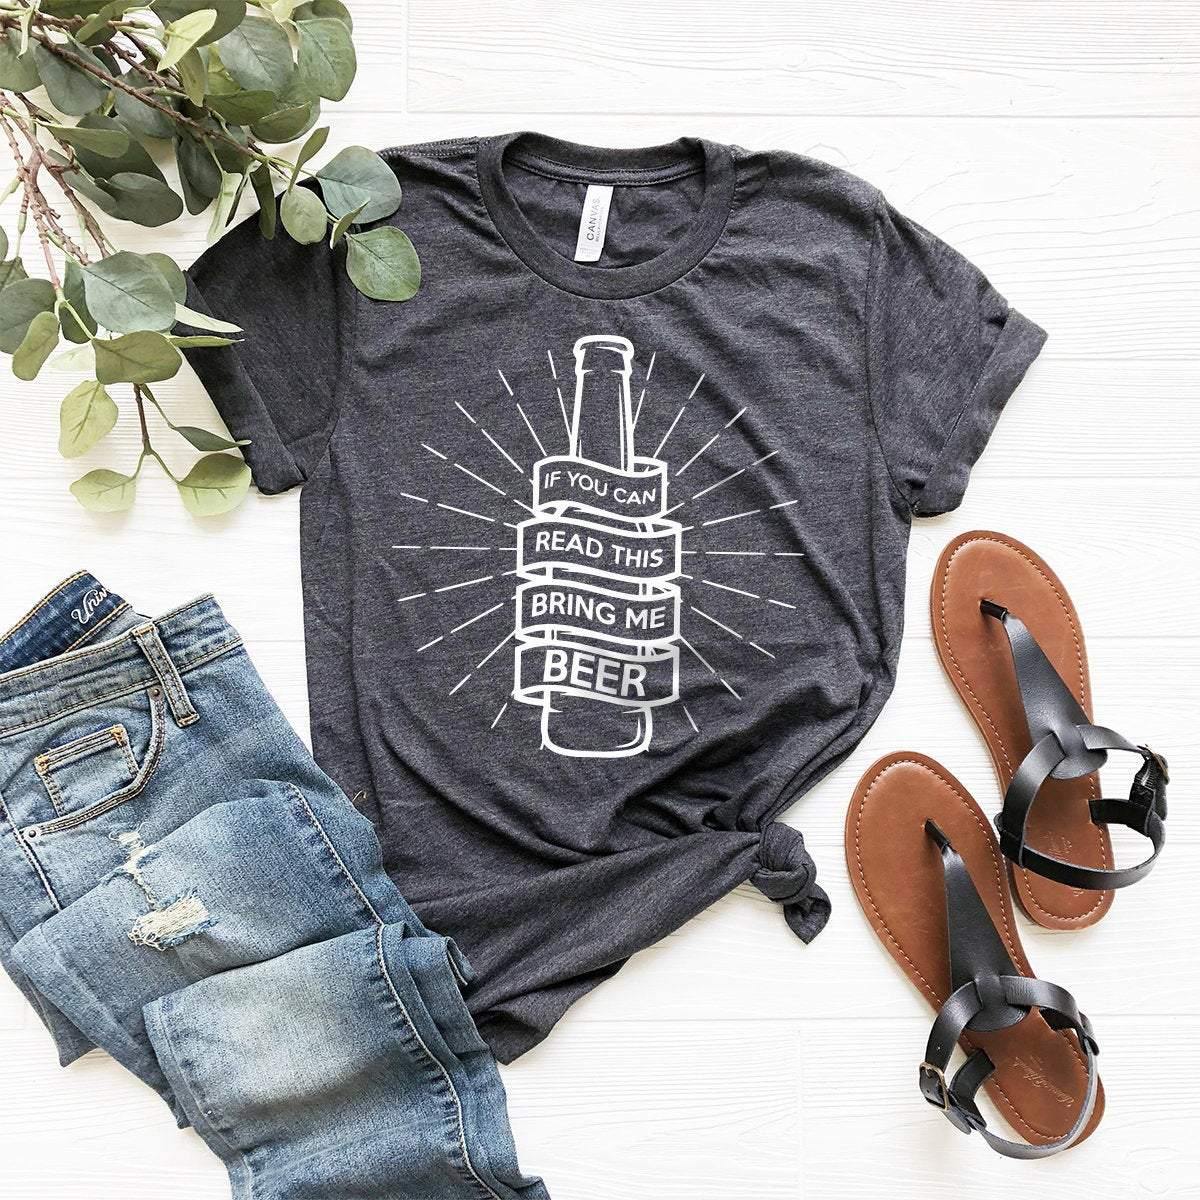 Beer T-Shirt, Beer Lover Gift, Drink Beer Shirt, Drinking Beer Tee, Funny Beer Shirt, If You Can Read This Bring Me Beer Tee, Drinking Shirt - Fastdeliverytees.com